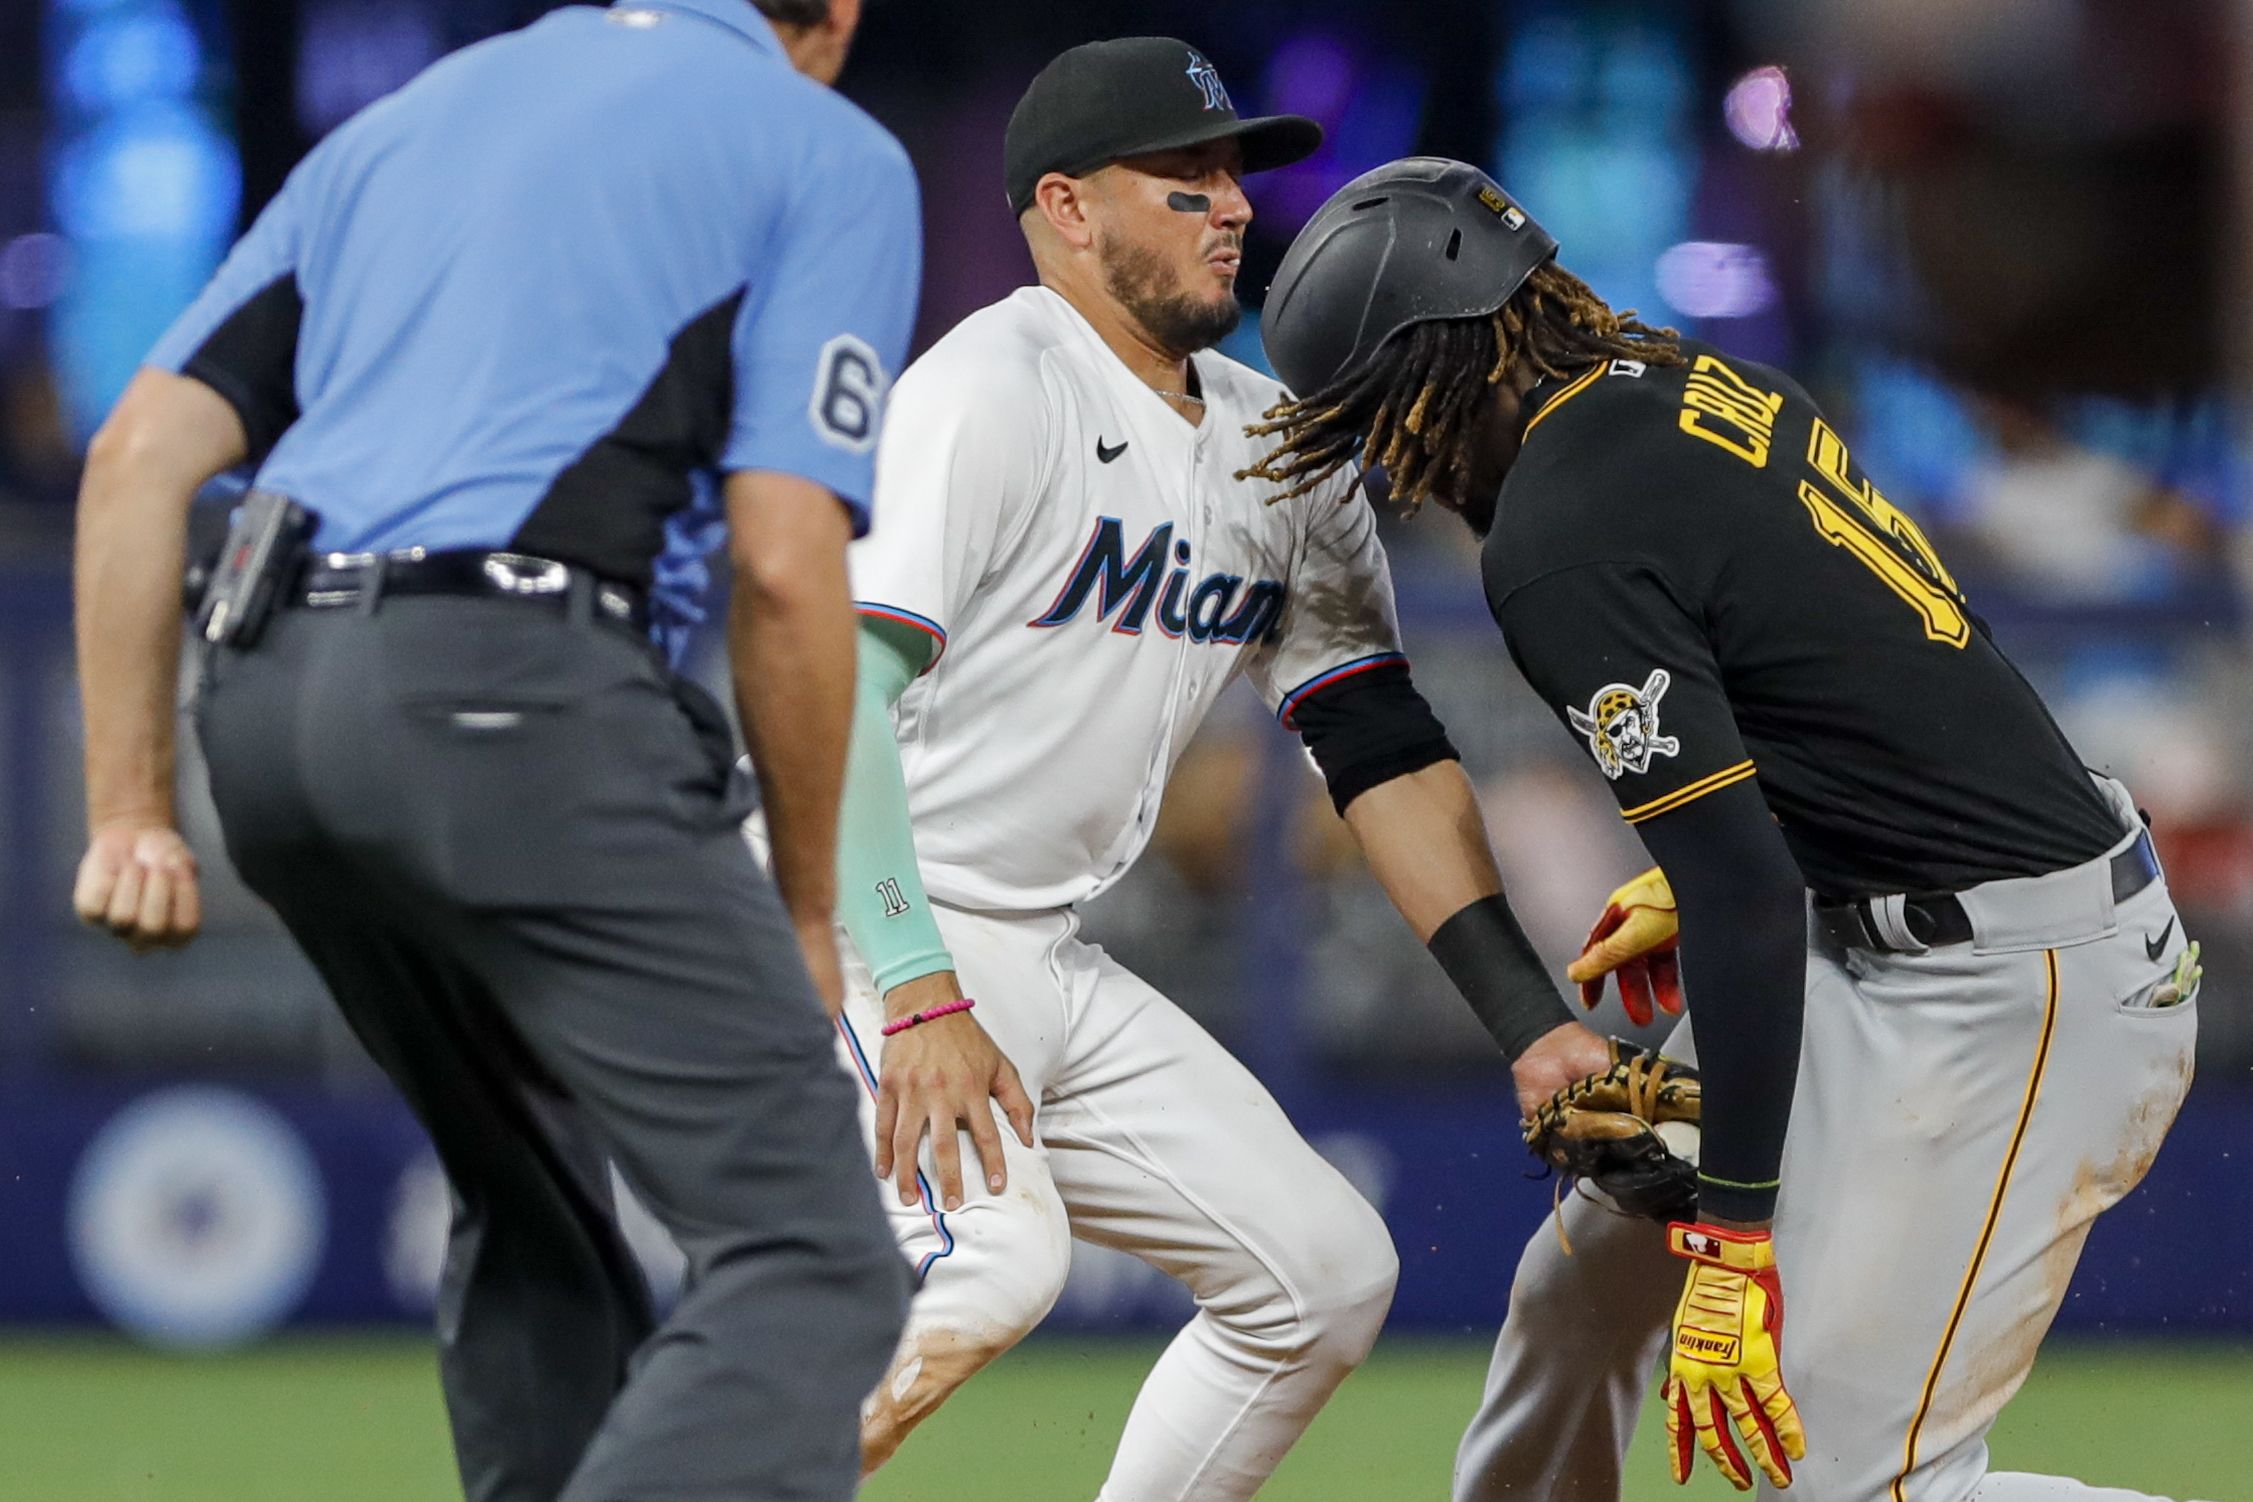 Miguel Rojas: Miami Marlins shortstop gets tooth knocked out but